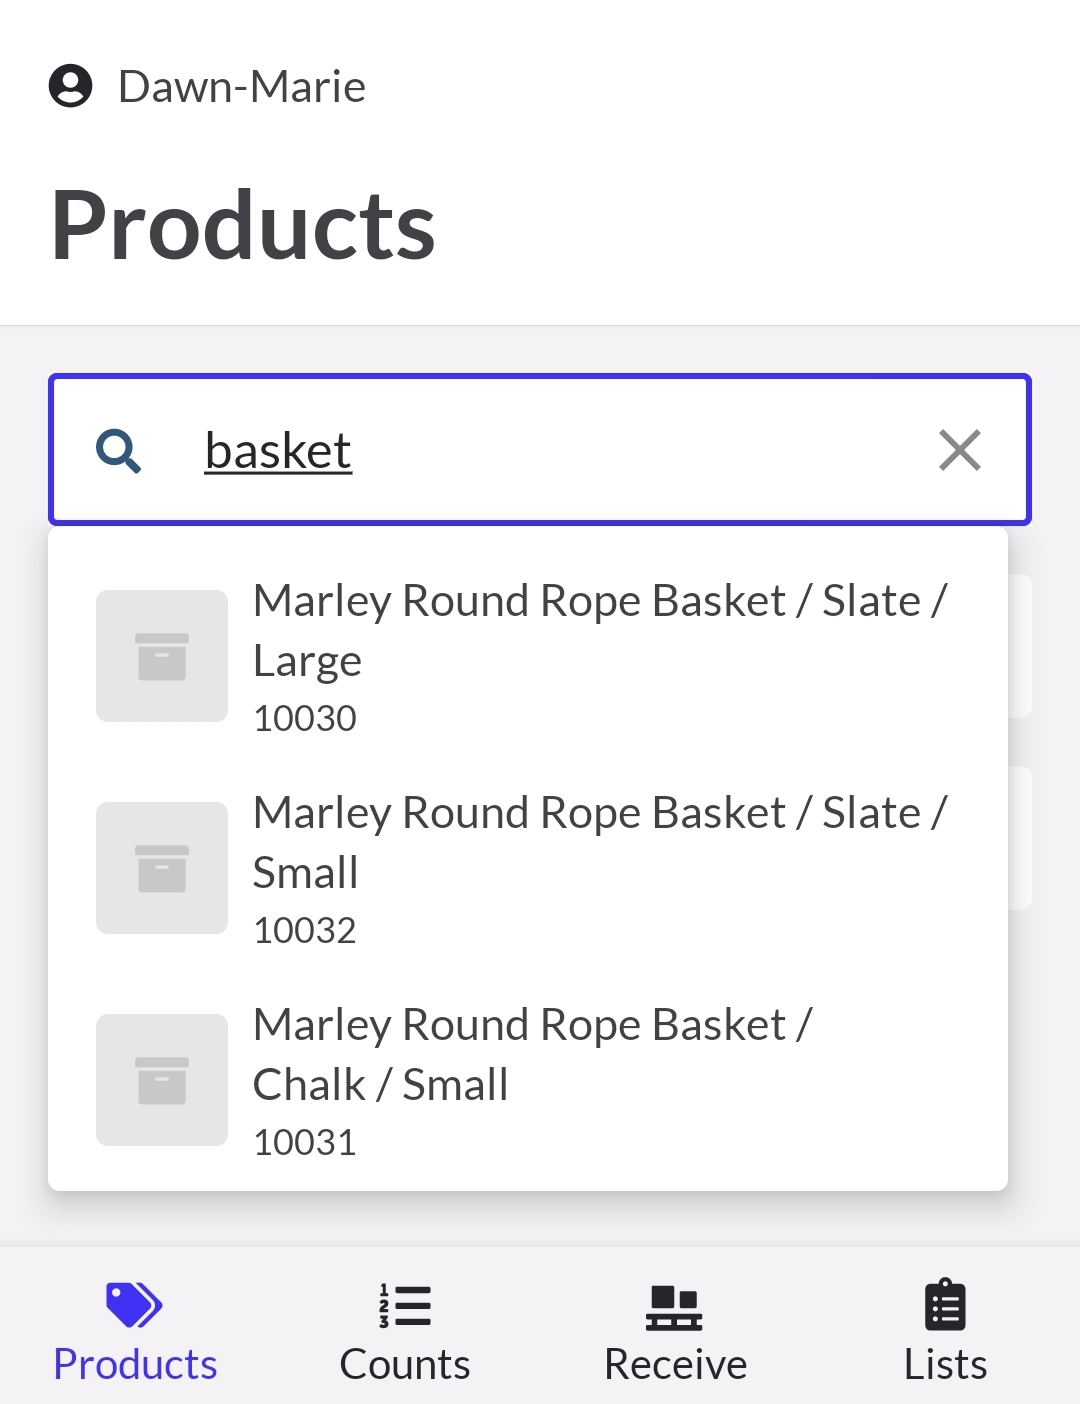 Products page with a product keyword entered in the search bar.